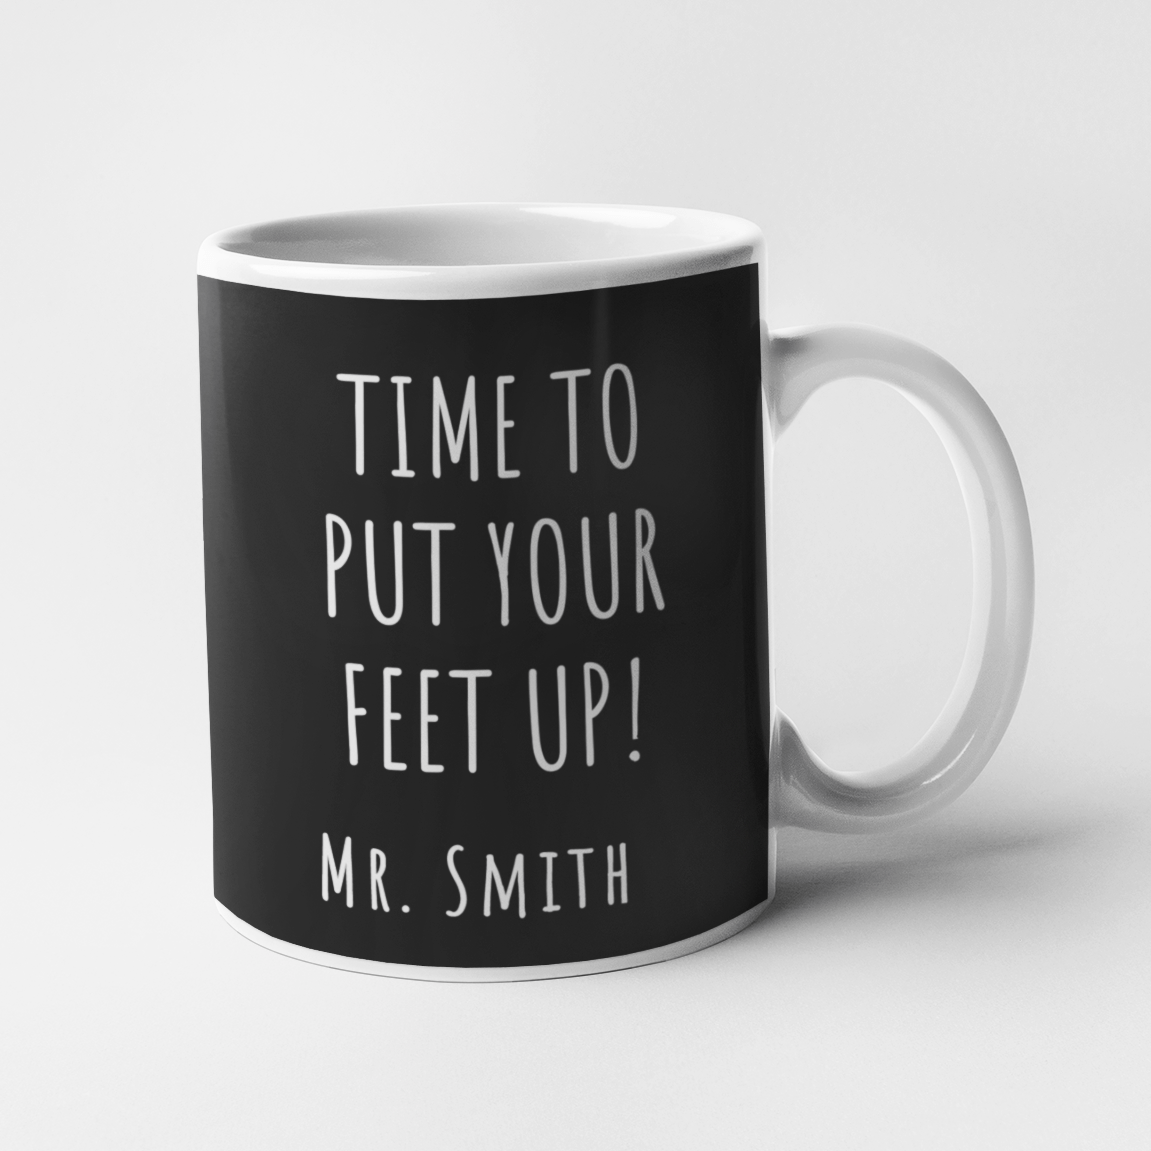 Time to put your feet up! Personalised Mug